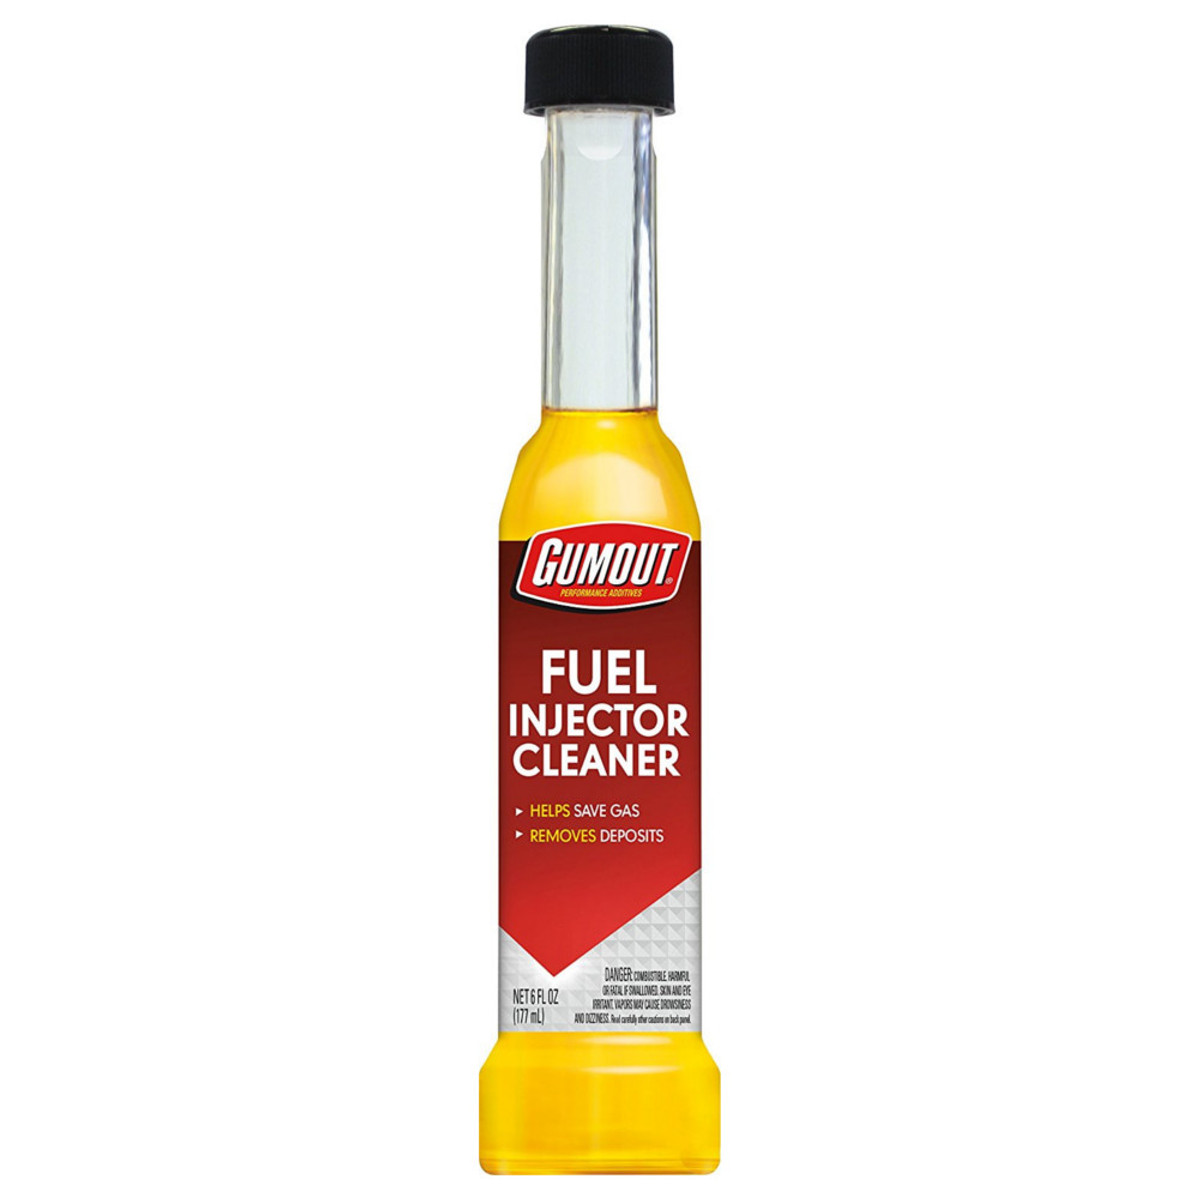 Risks of using fuel injector cleaner?